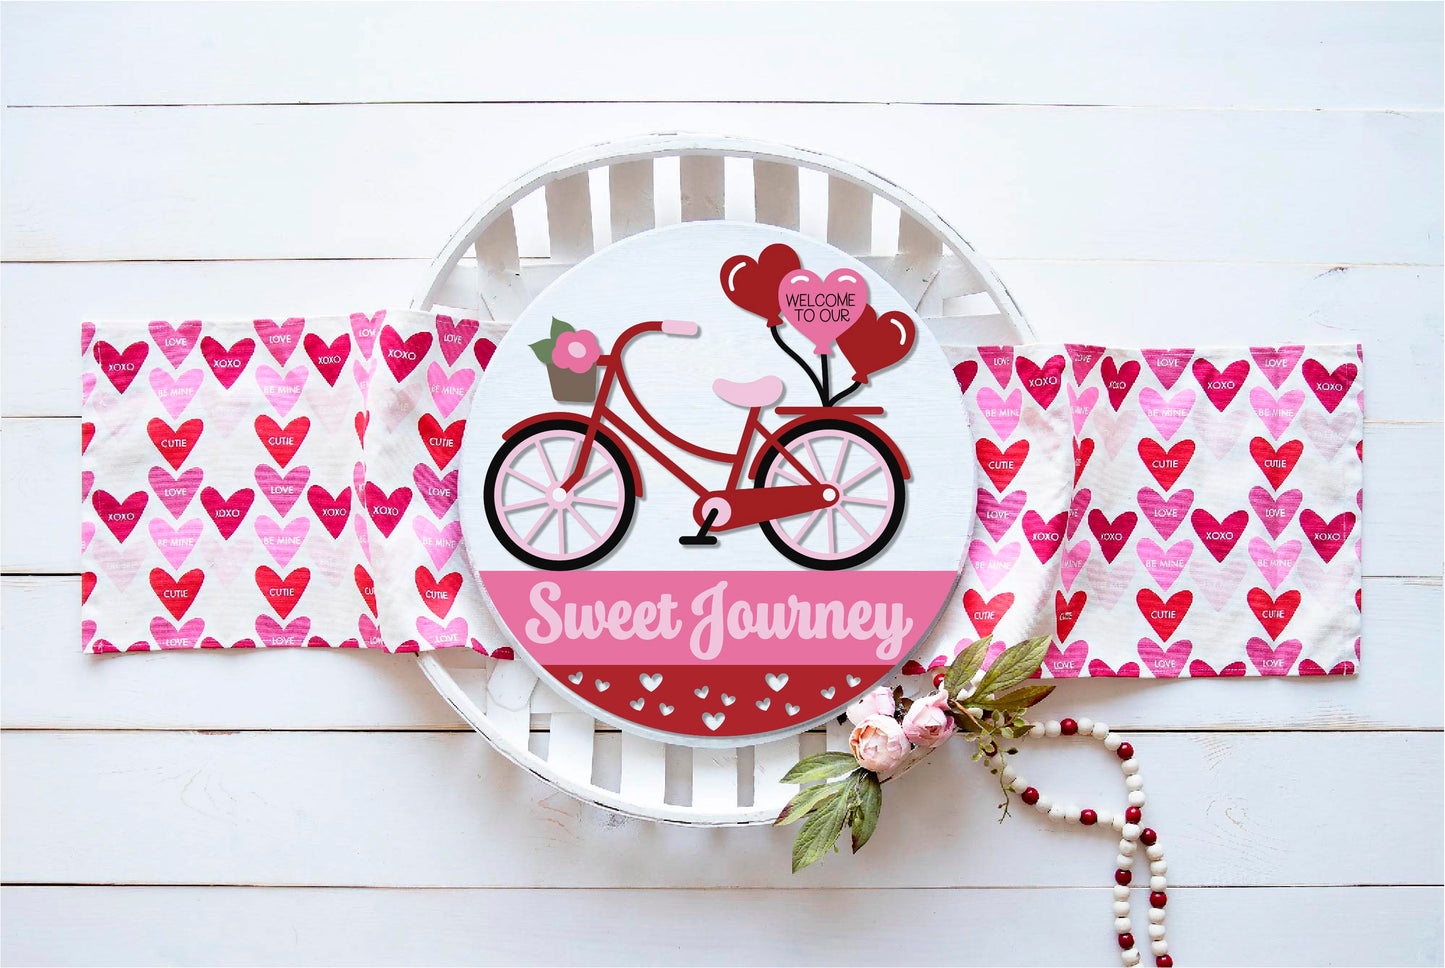 Welcome to our Sweet Journey Valentine sign